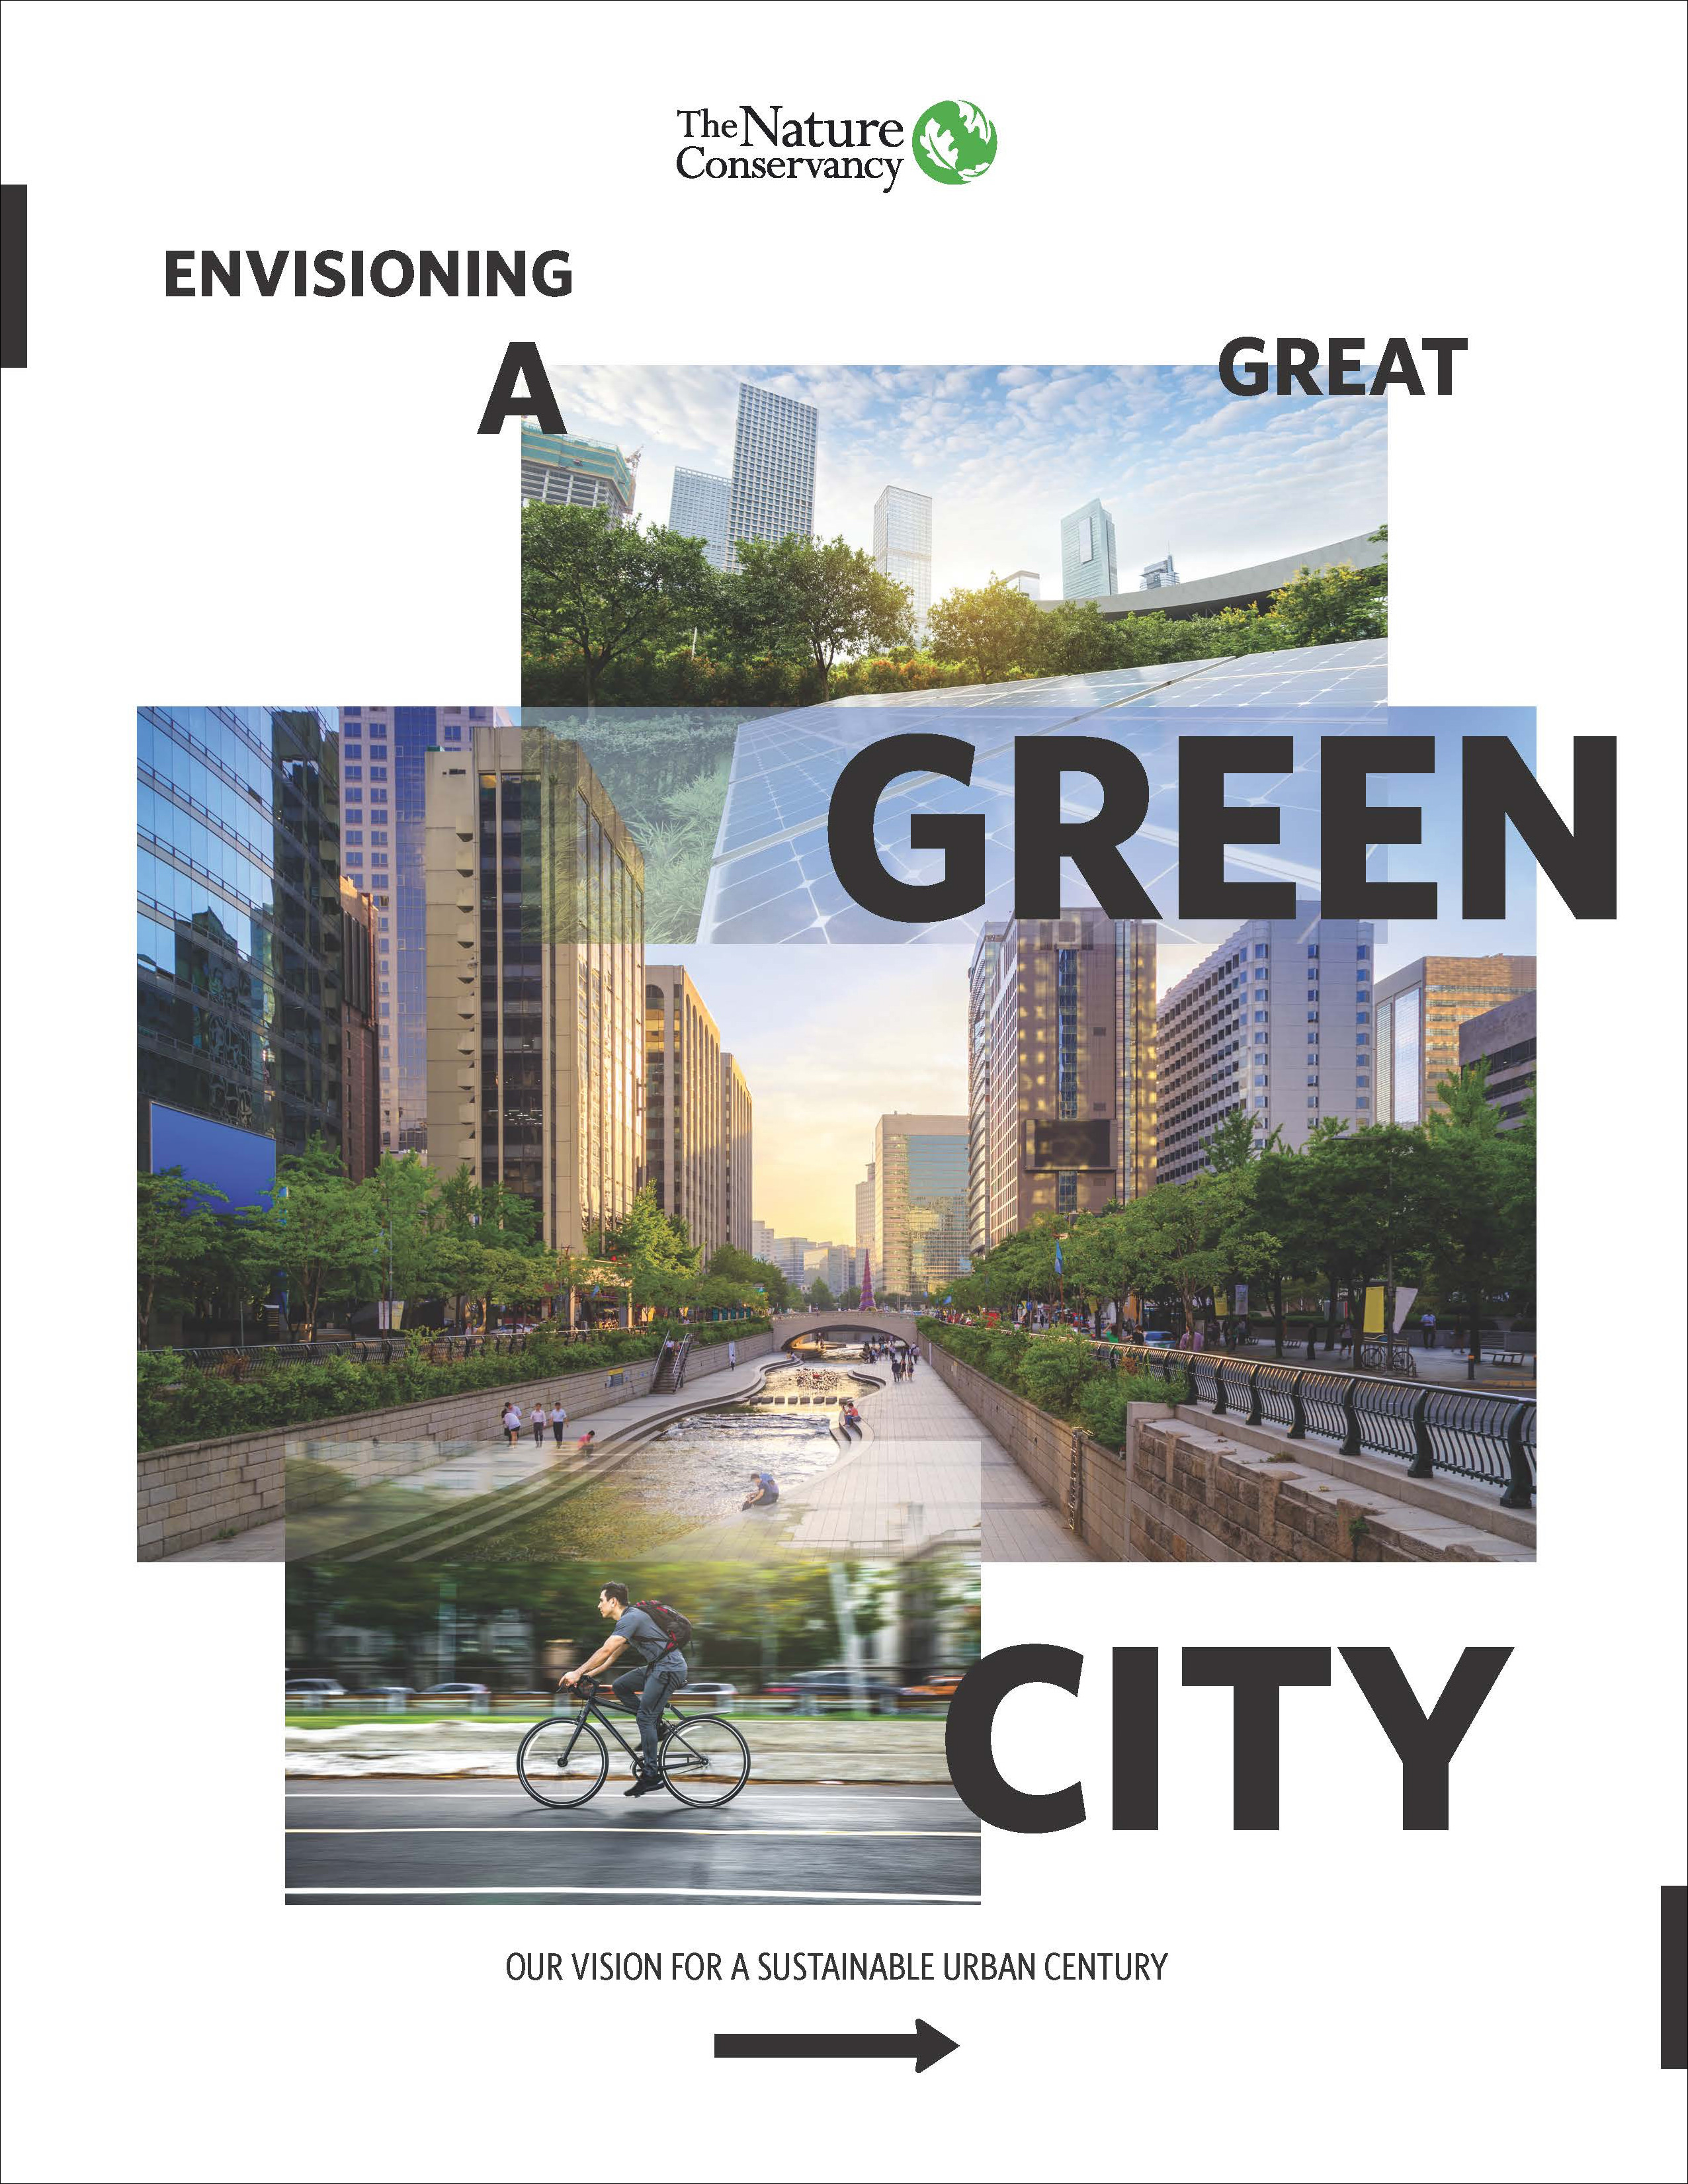 Report - Envisioning a Great Green City